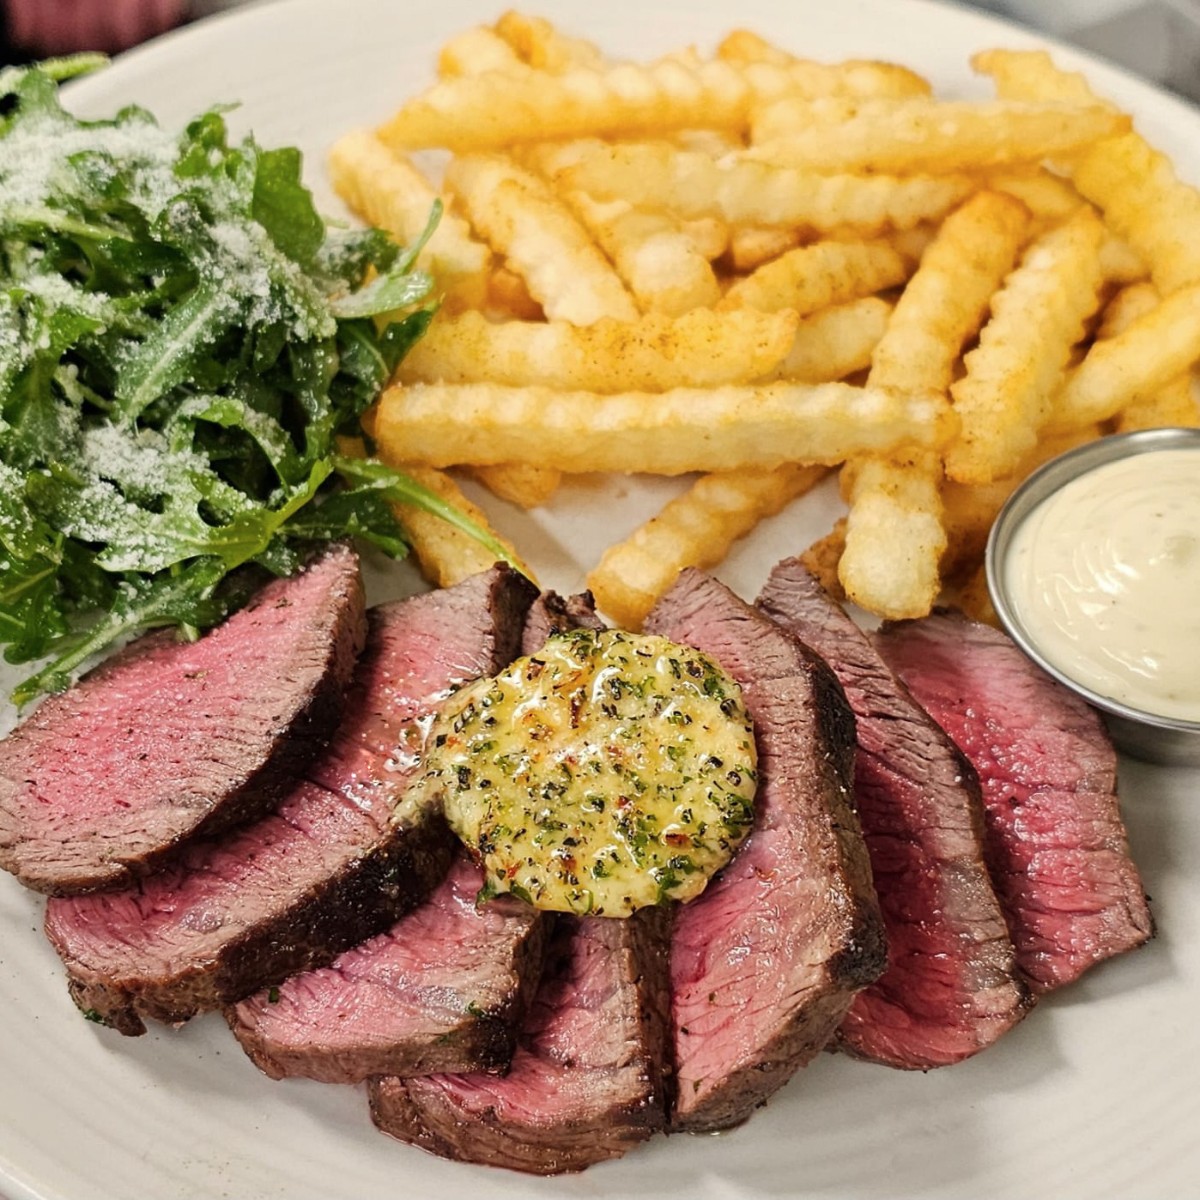 Our kitchen crew is really raising the steaks with this dinner feature 👀 Come out and start your weekend off right with a top sirloin, fries, garlic aioli, arugula salad, and garlic, chilli and herb butter!